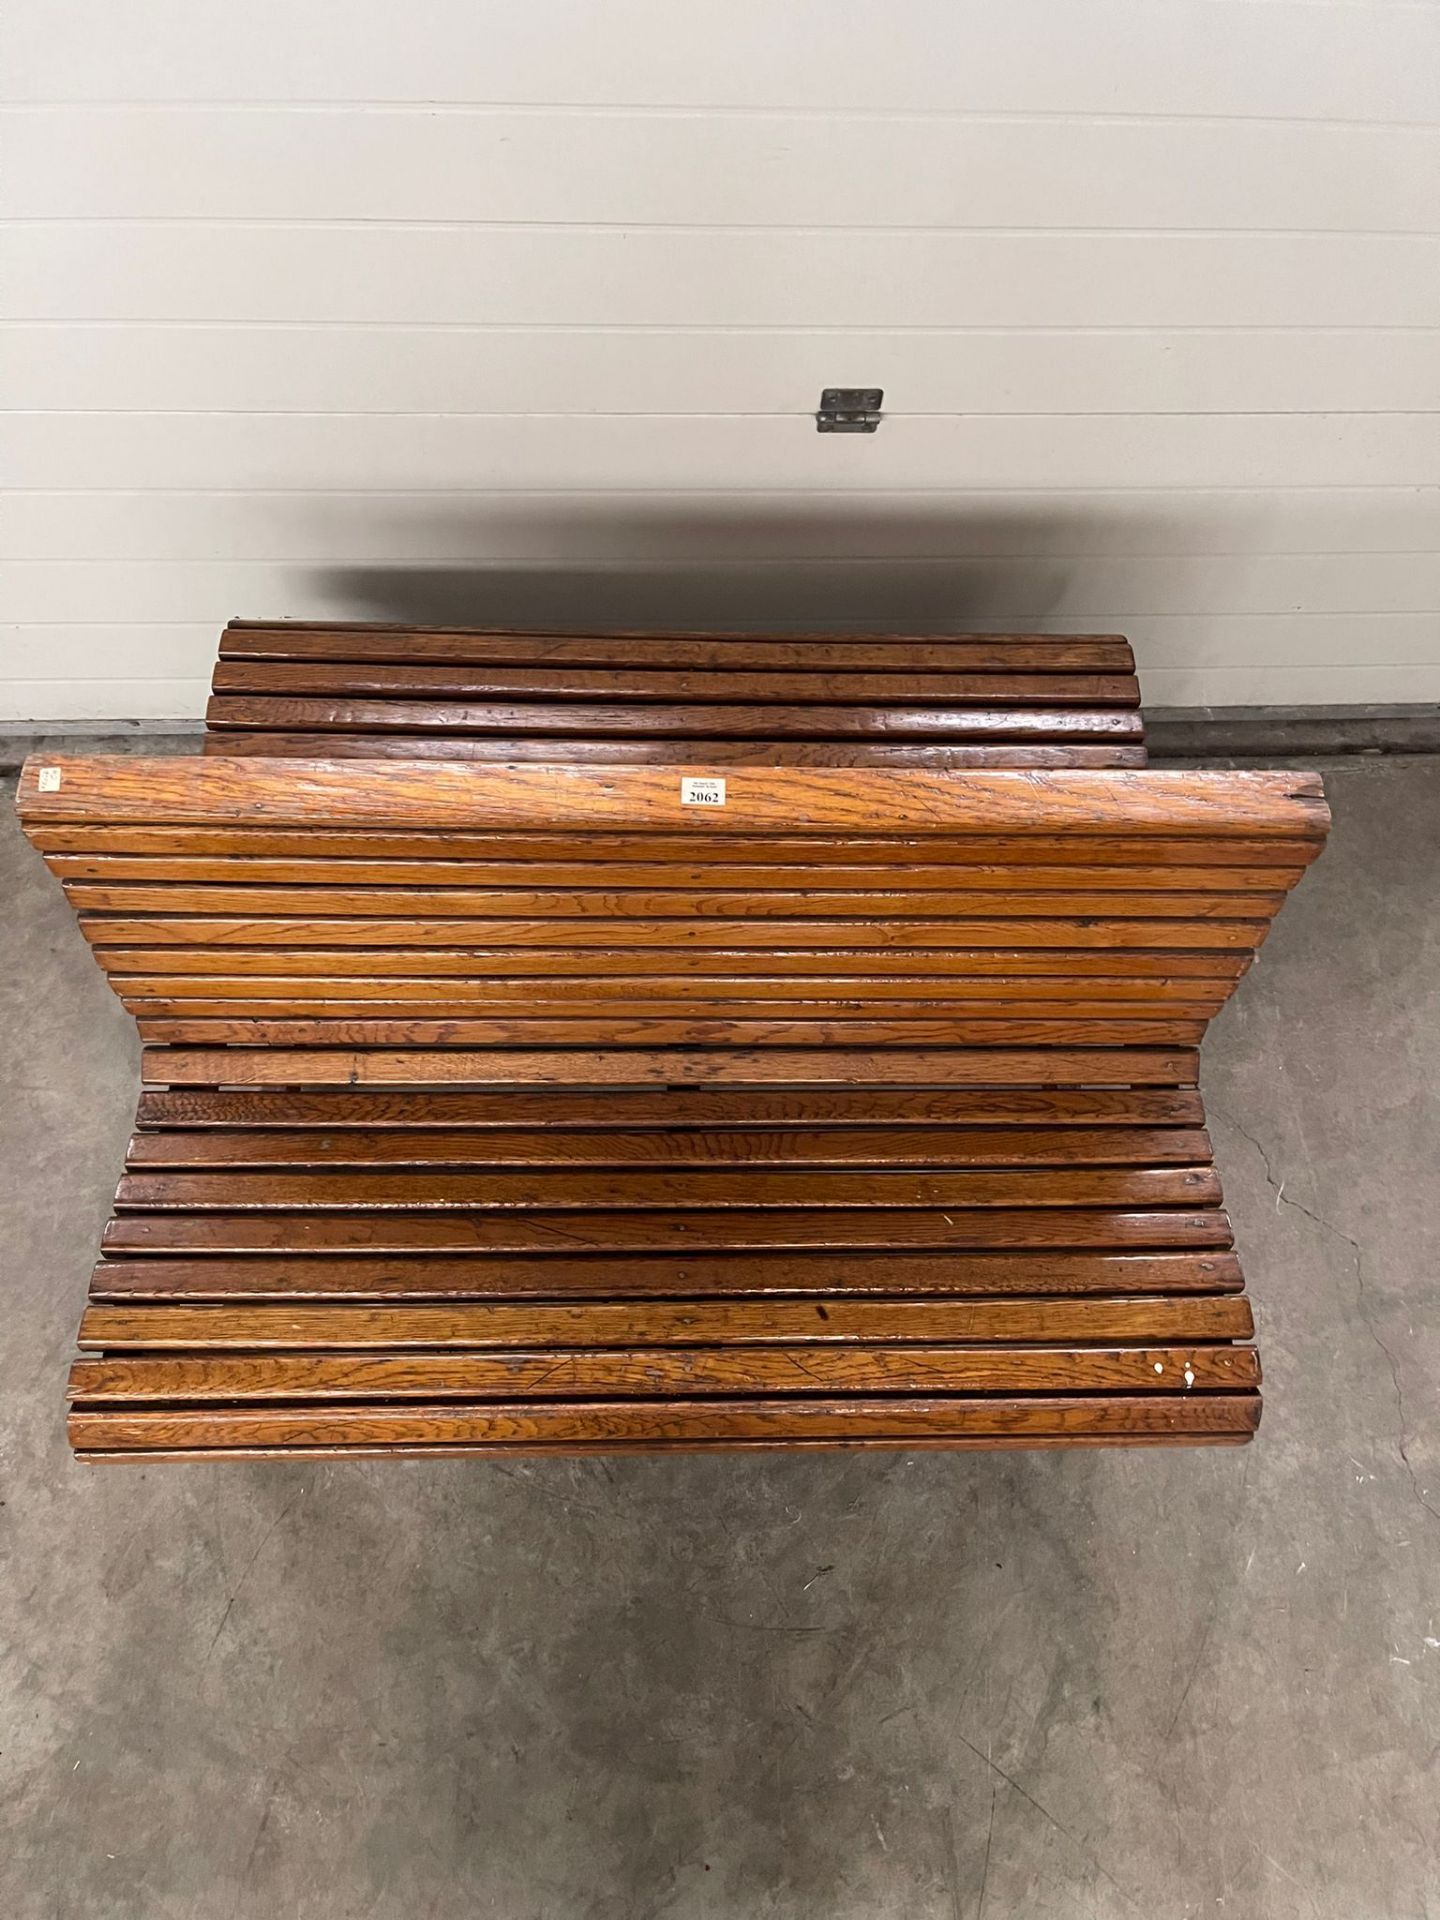 Double Sided Wooden Bench from Amsterdam Tour Boat - Bild 3 aus 3